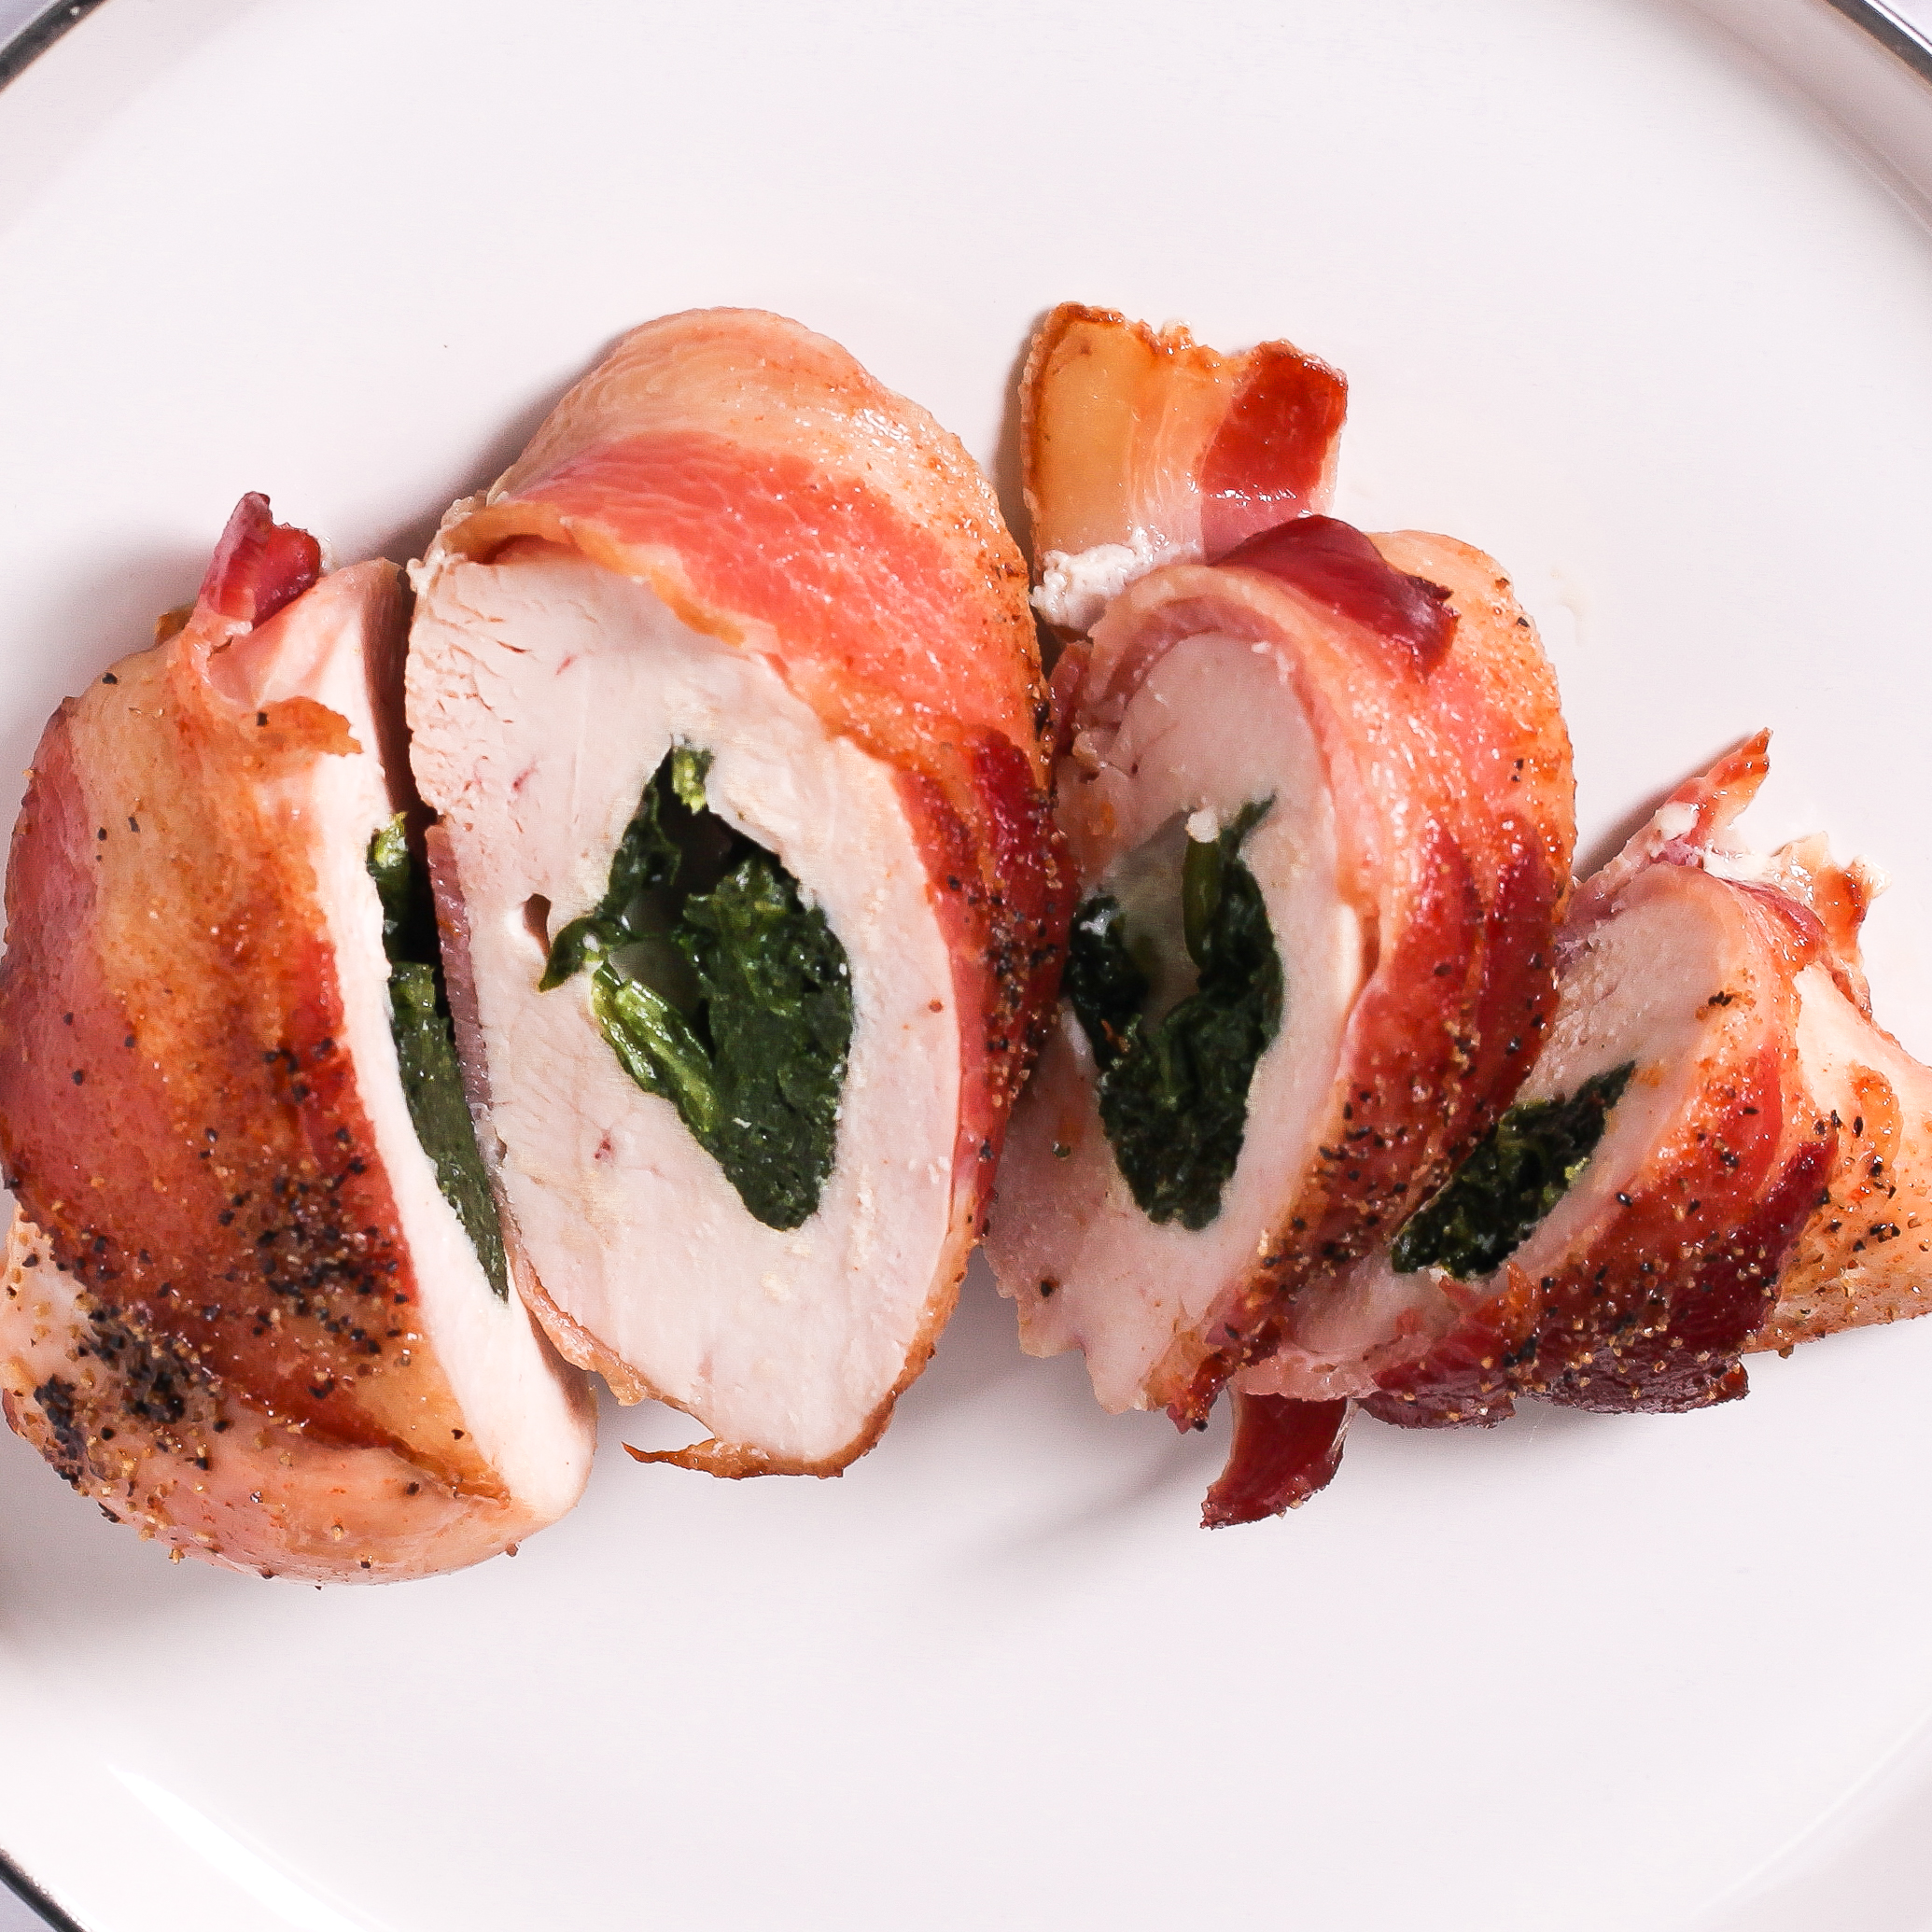 Bacon-wrapped Stuffed Chicken Breast